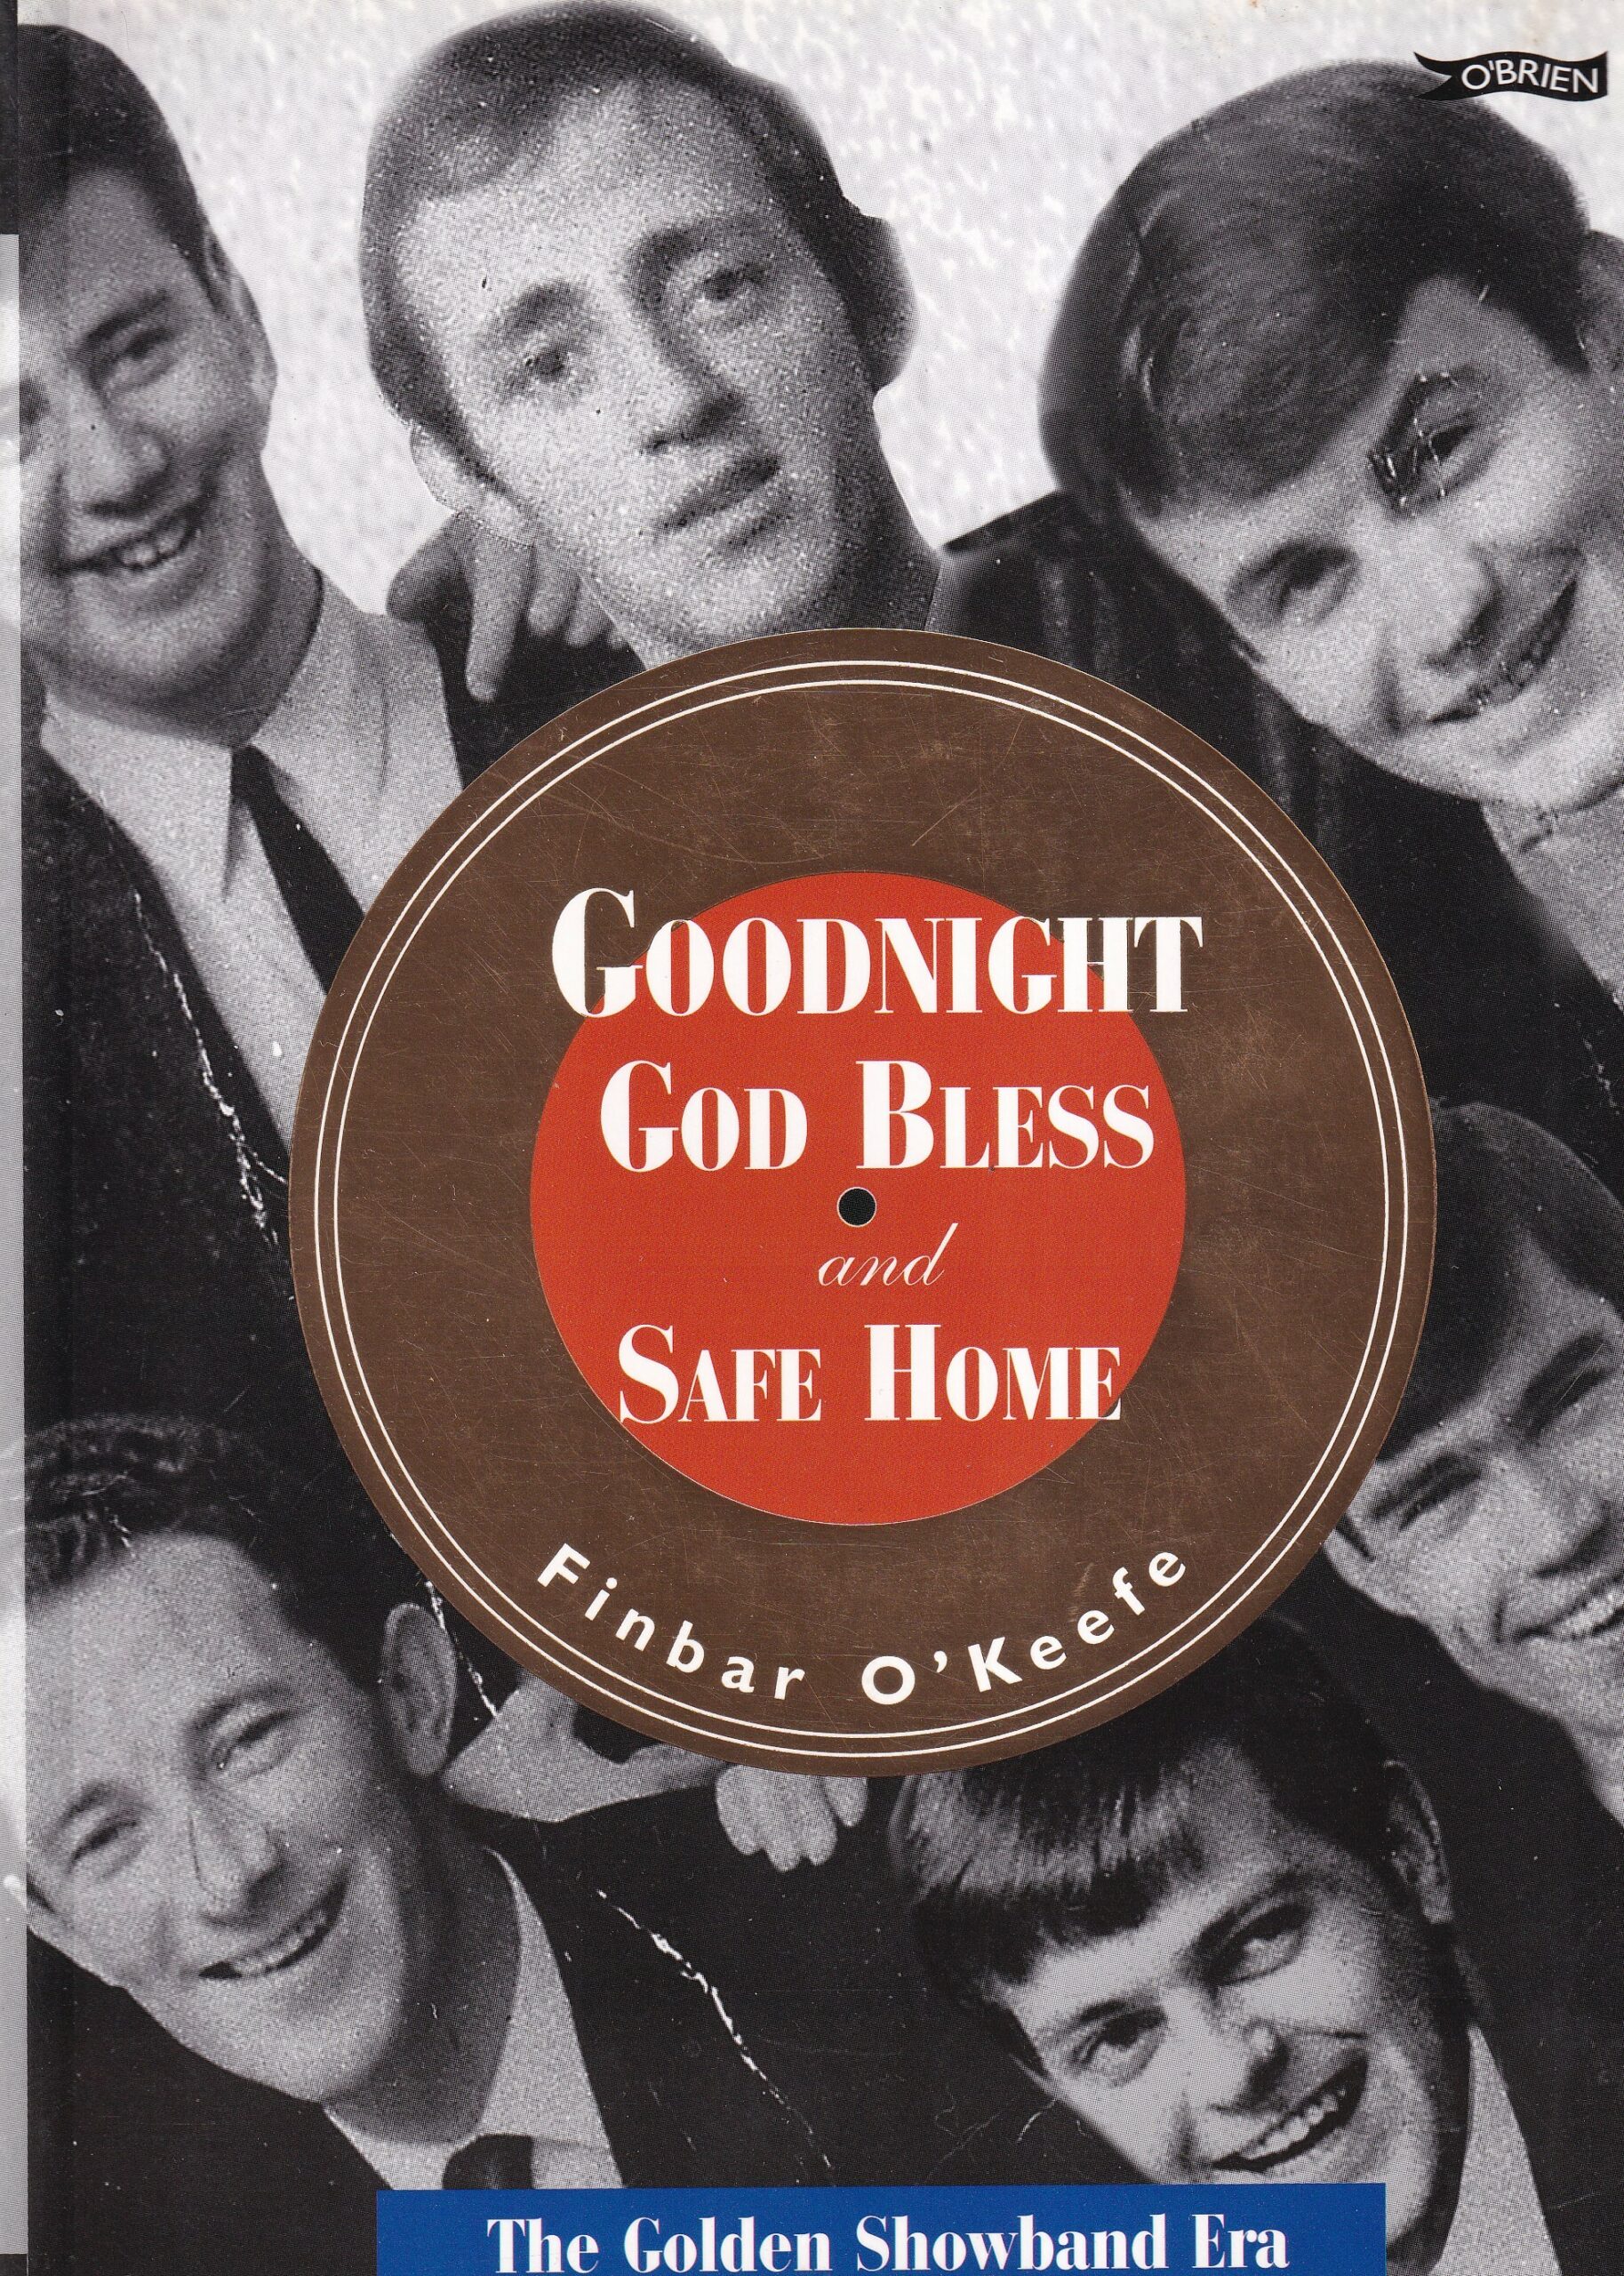 Goodnight God Bless and Safe Home: The Golden Showband Era by Finbar O'Keefe